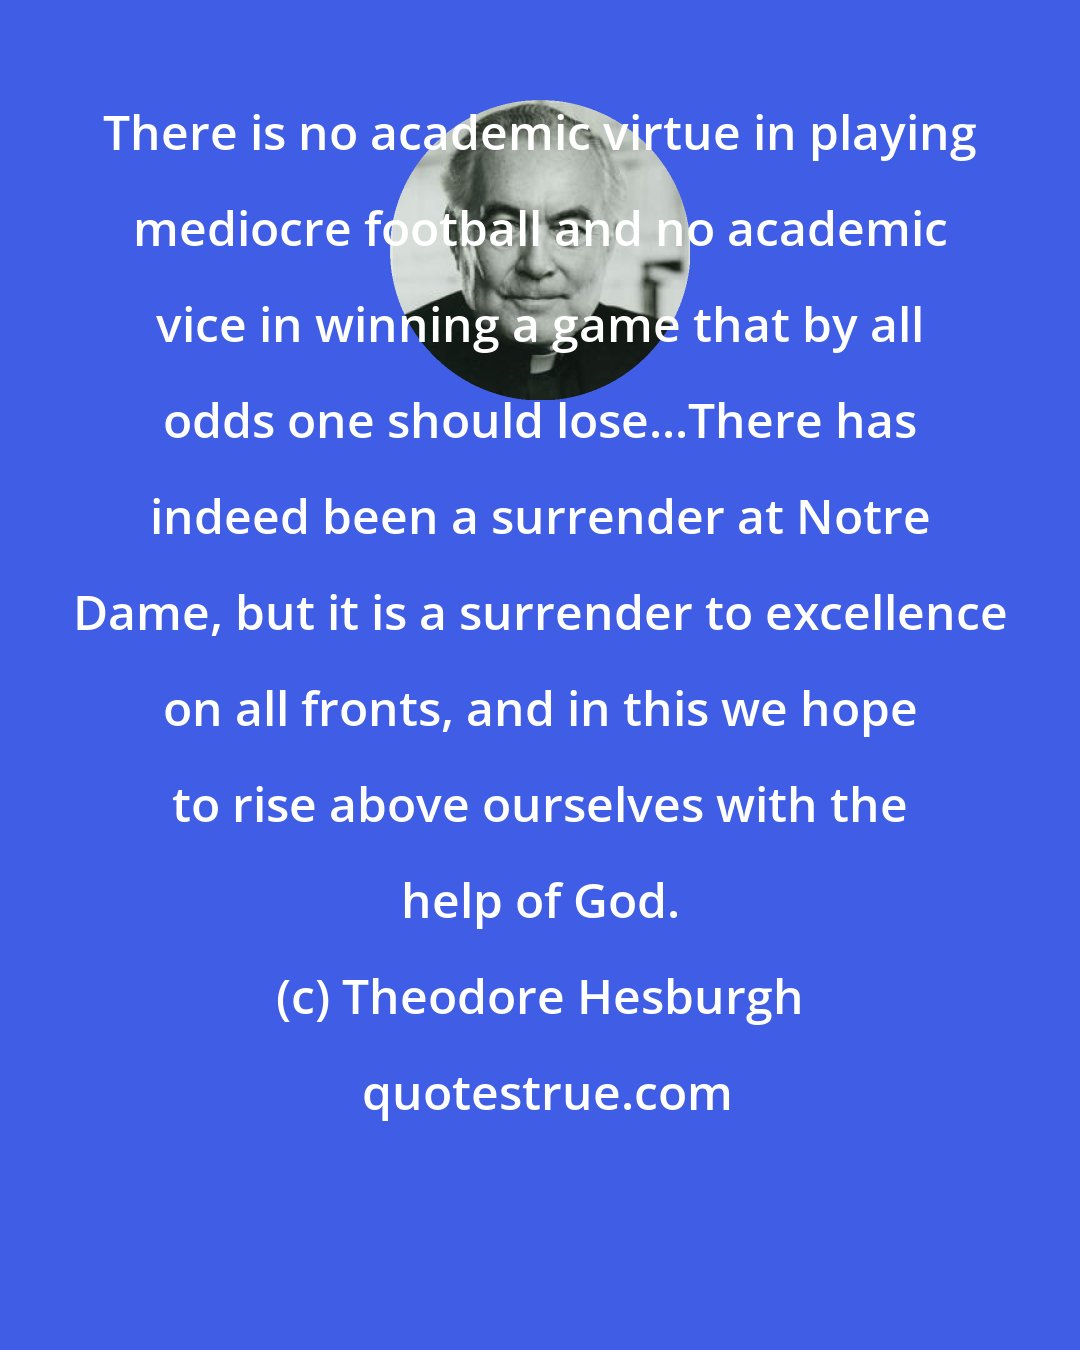 Theodore Hesburgh: There is no academic virtue in playing mediocre football and no academic vice in winning a game that by all odds one should lose...There has indeed been a surrender at Notre Dame, but it is a surrender to excellence on all fronts, and in this we hope to rise above ourselves with the help of God.